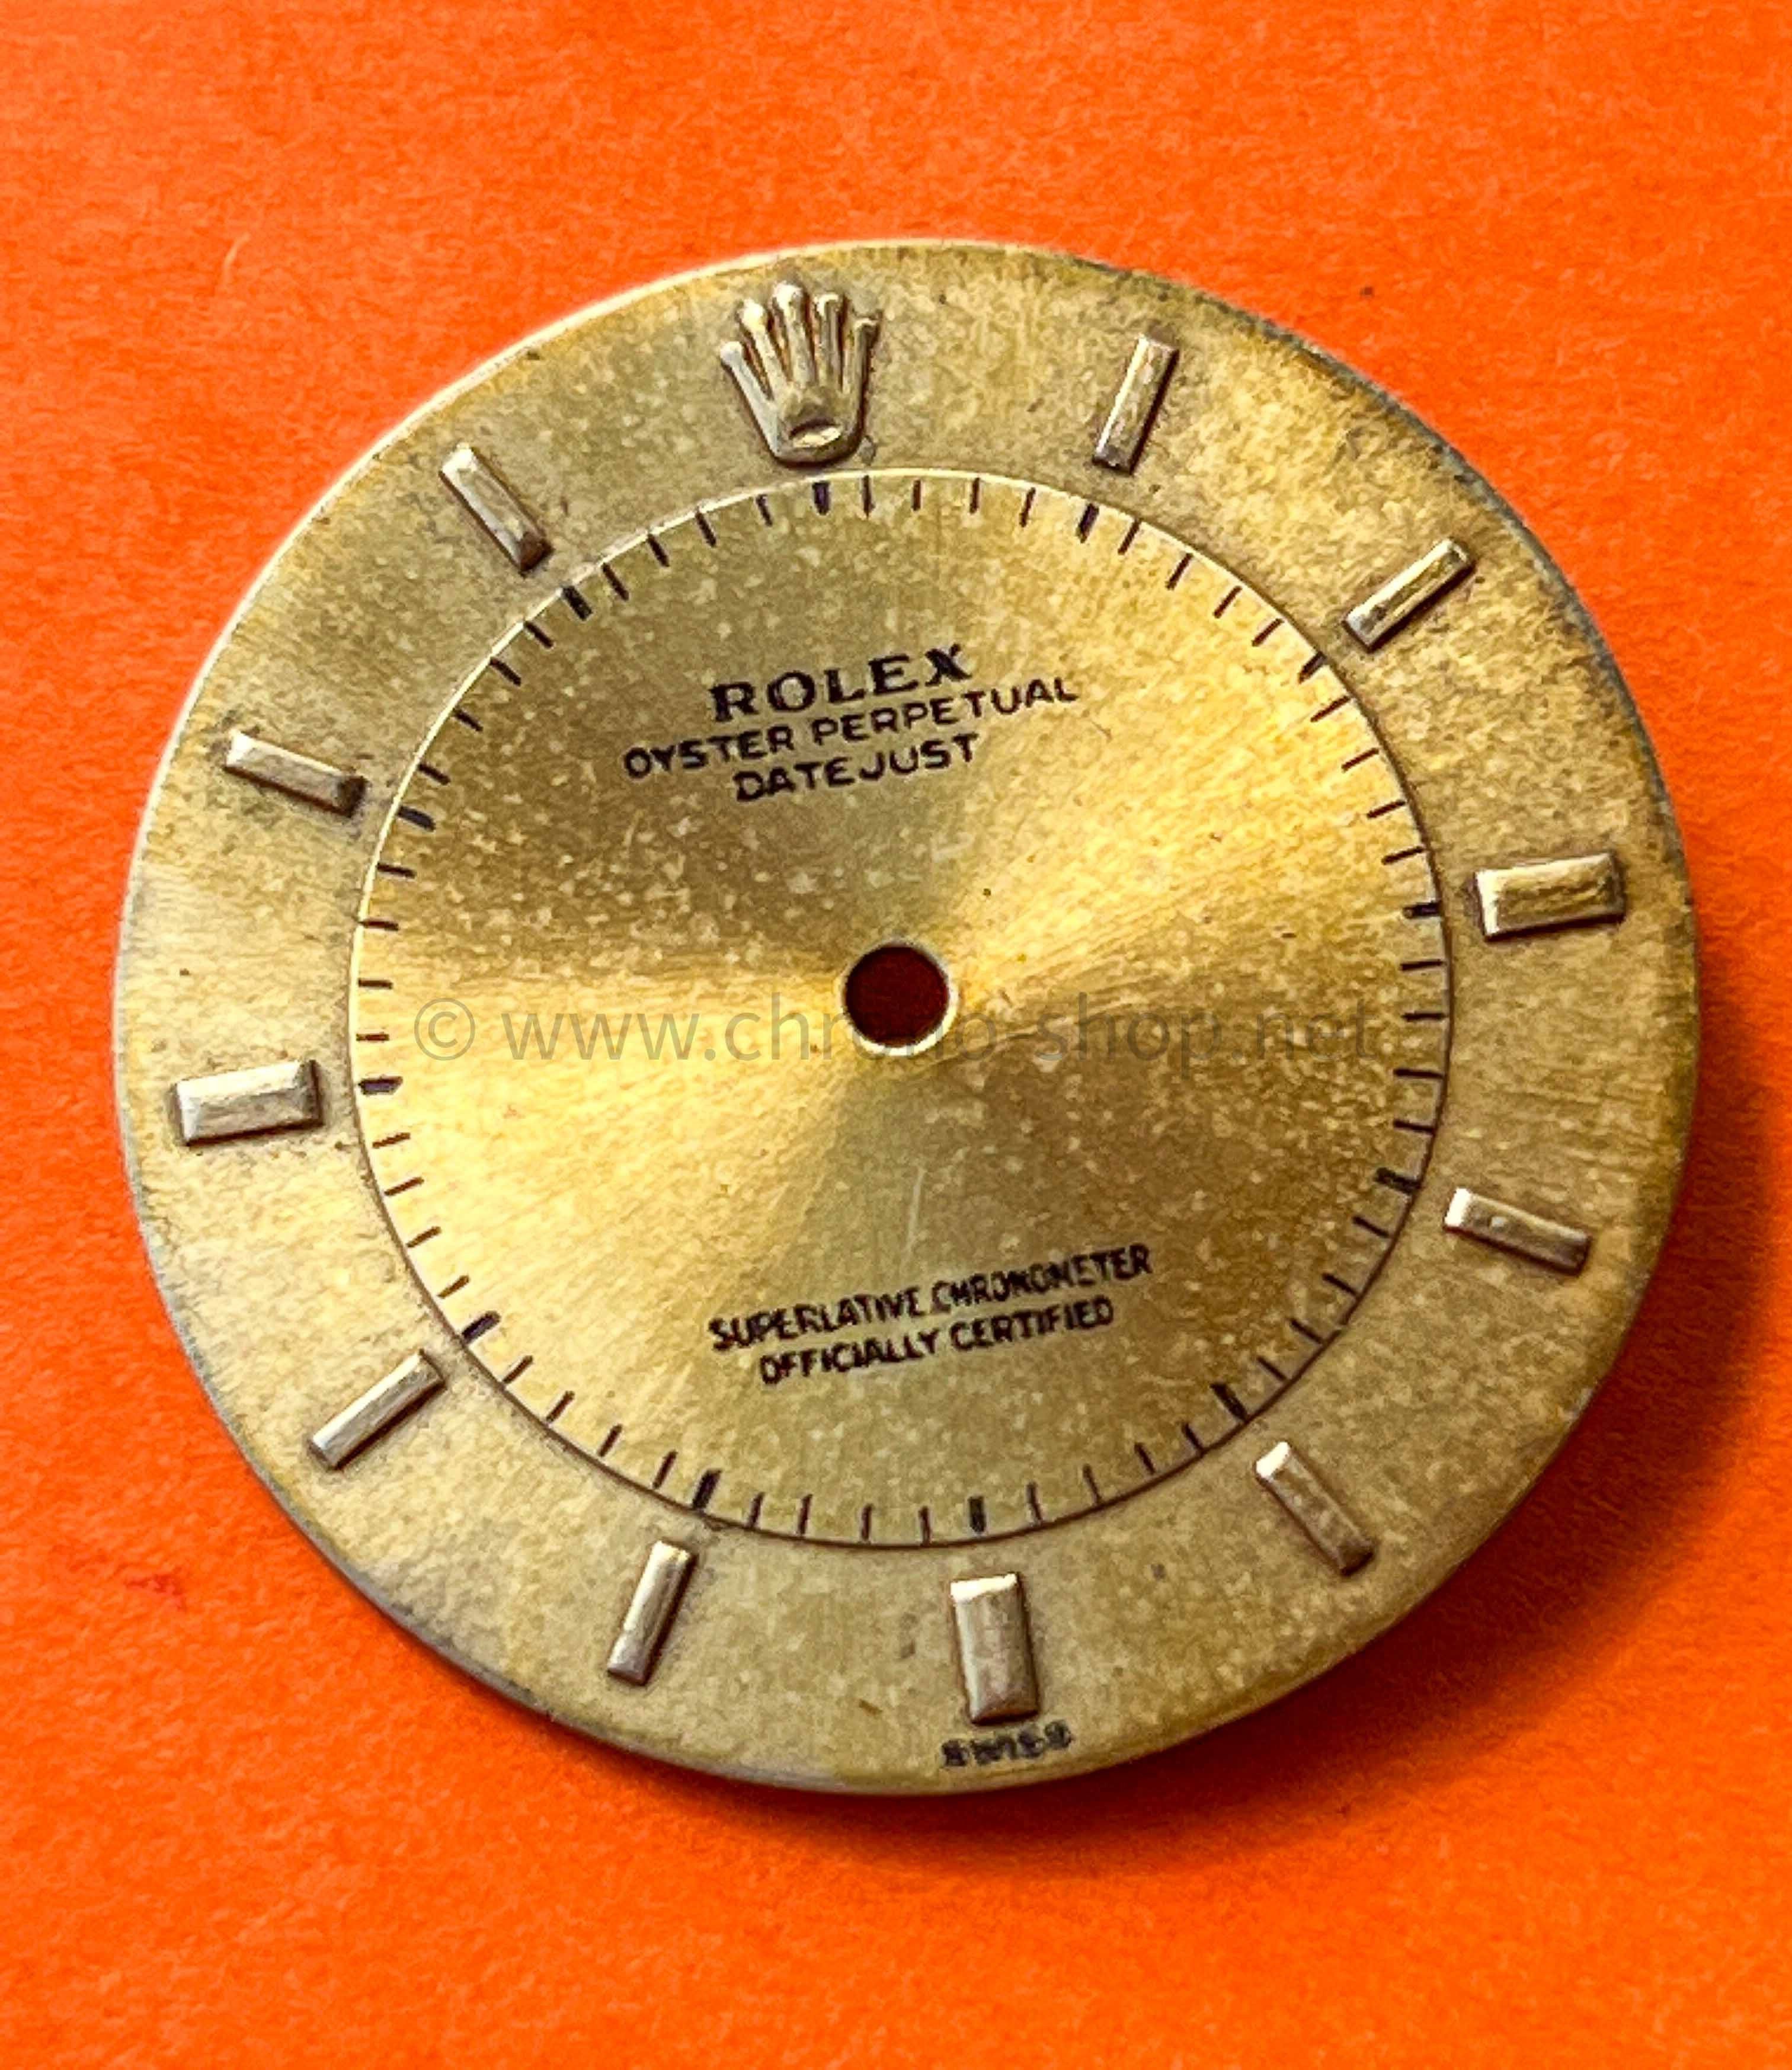 Rolex Rare vintage Collectible Oyster Perpetual watch dial ref 6532 bull eye circa 1955 CALIBER 1030 for restore